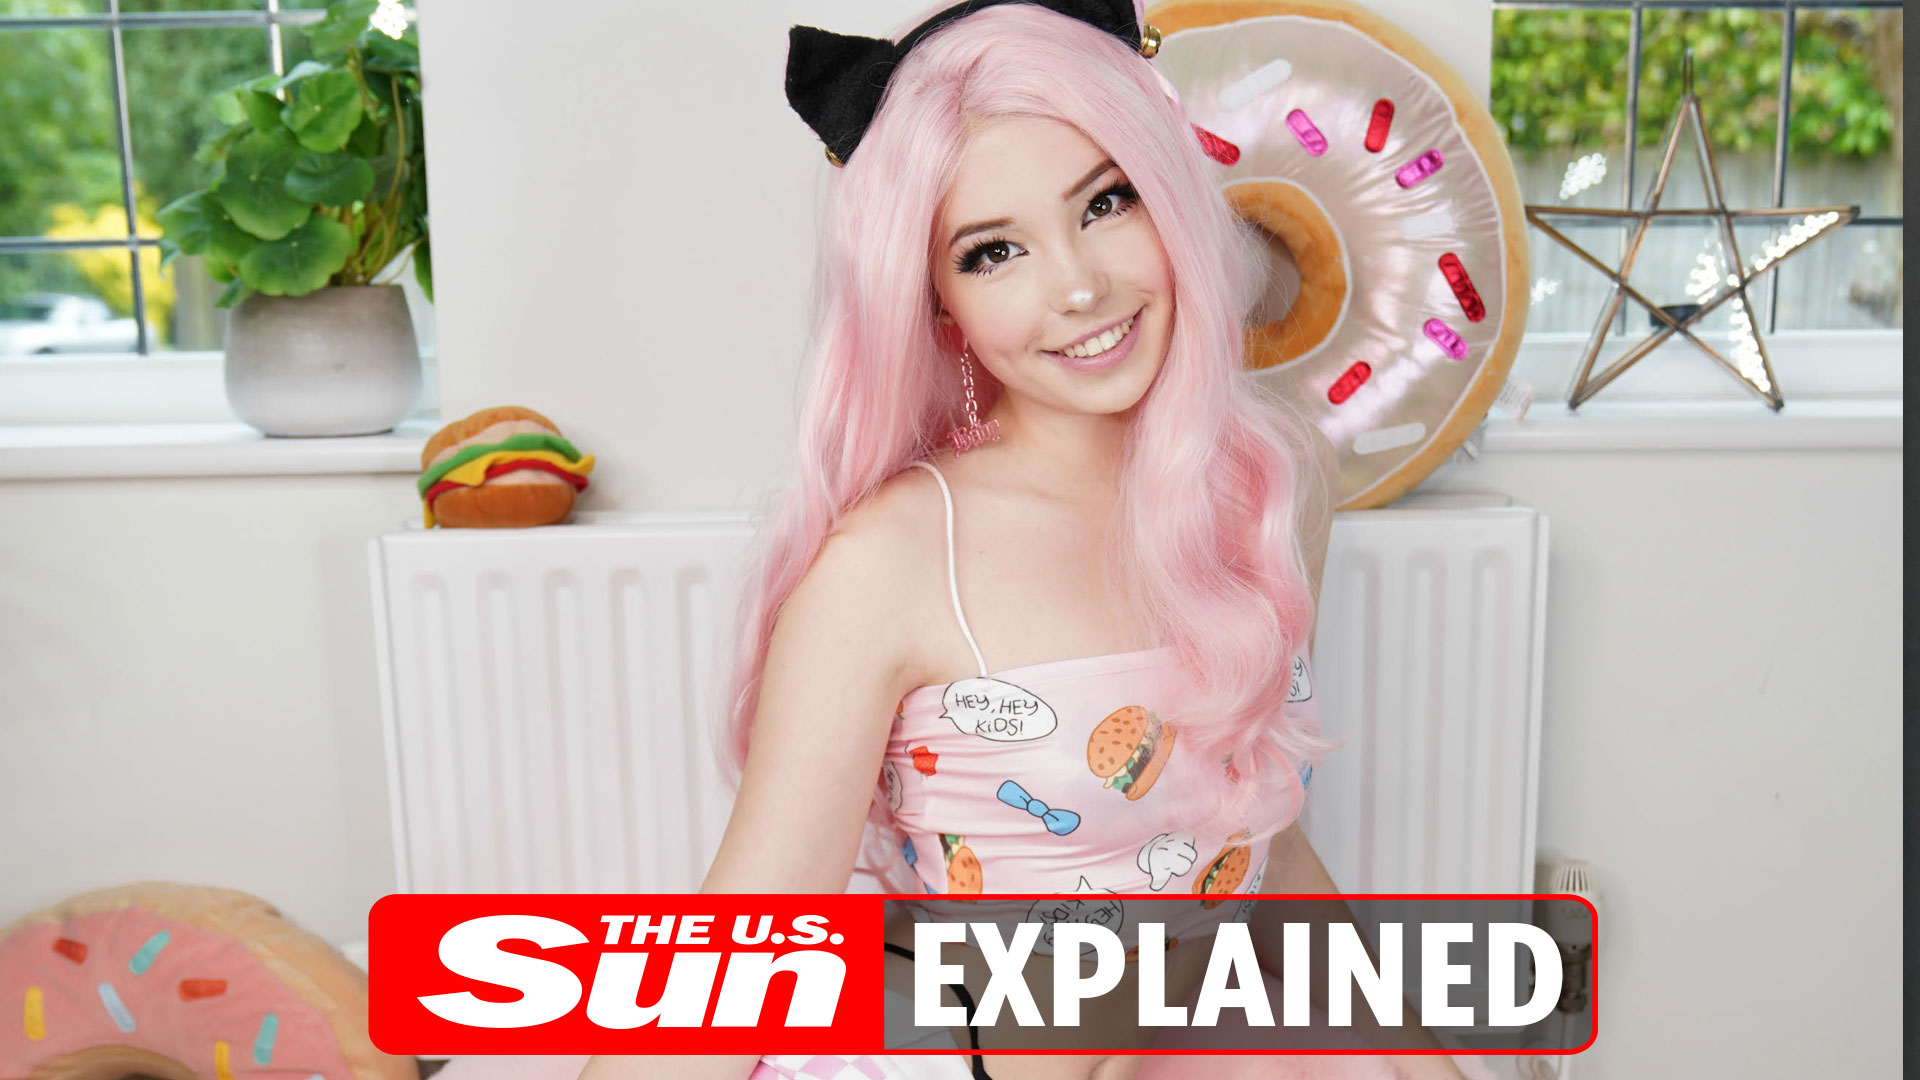 carly kidd recommends belle delphine my perfect date pic